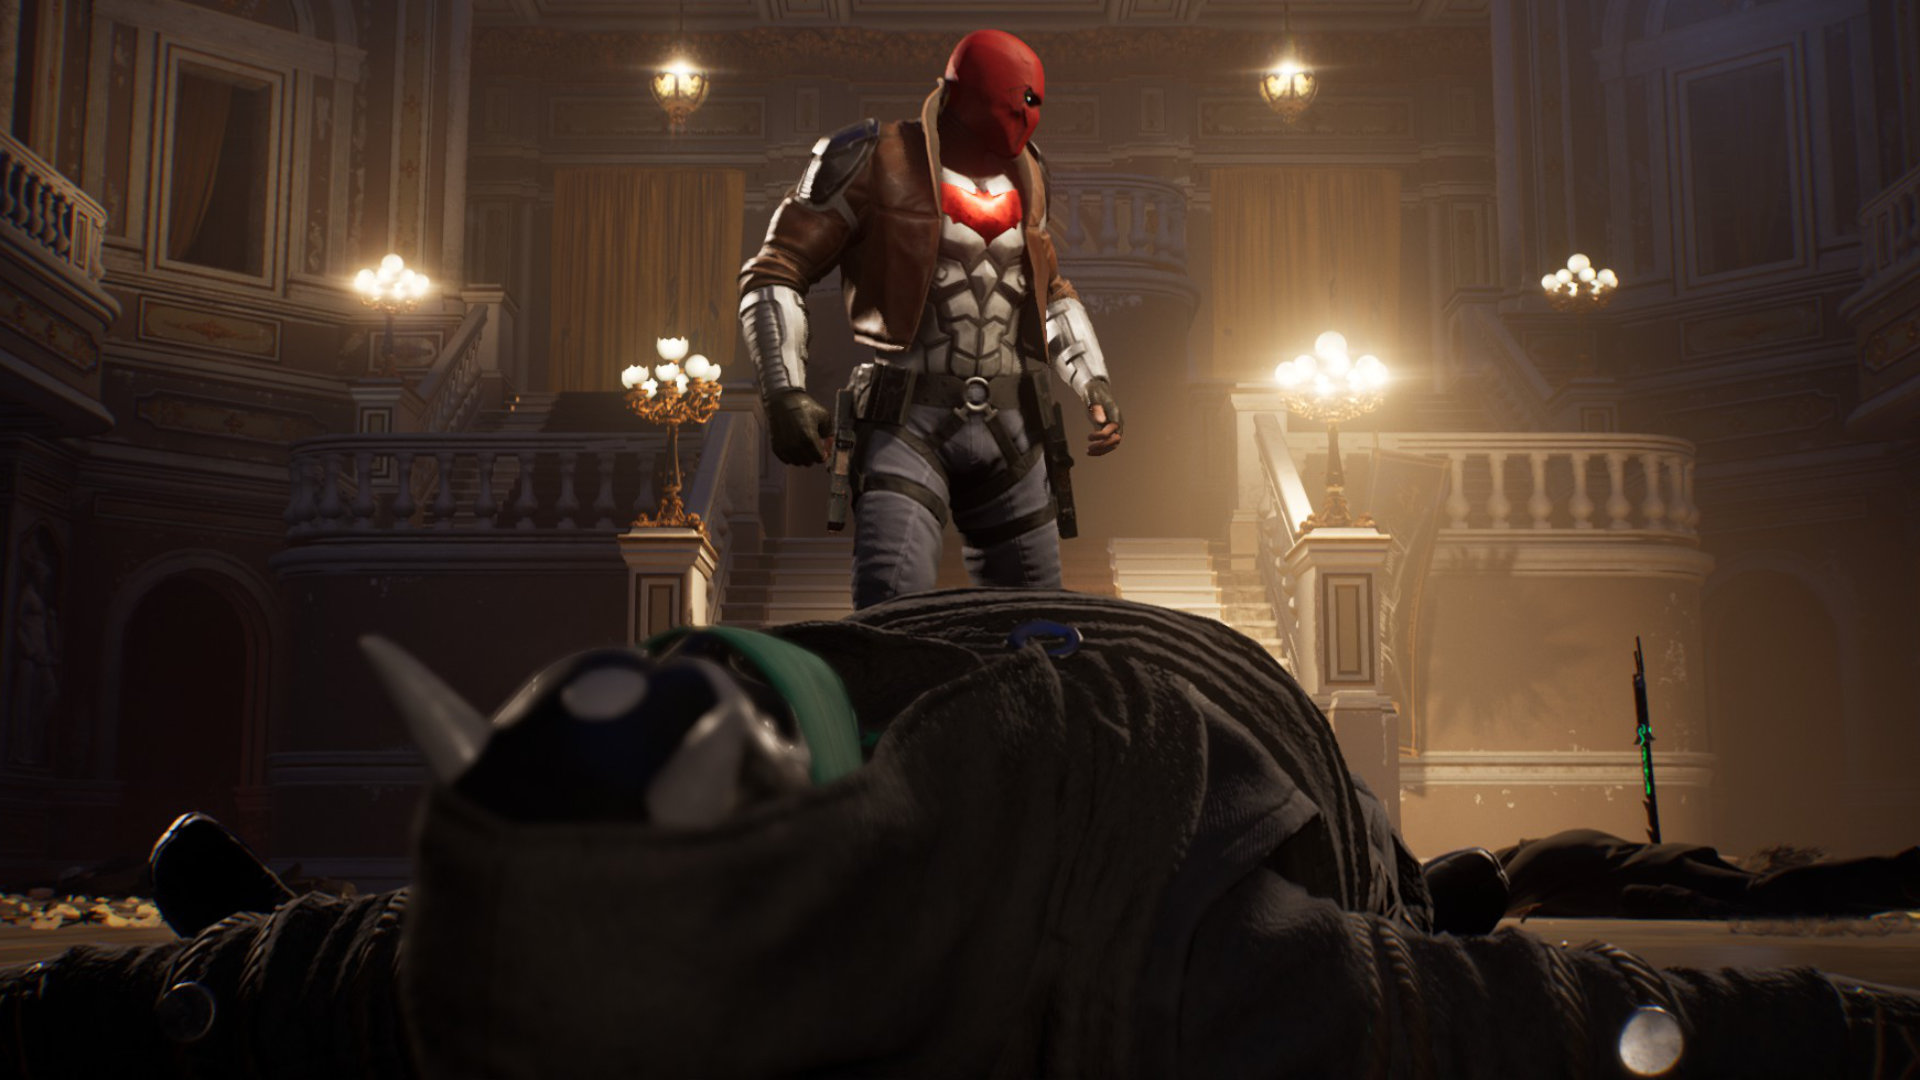 Gotham Knights: The Biggest Fixes The Game Needs